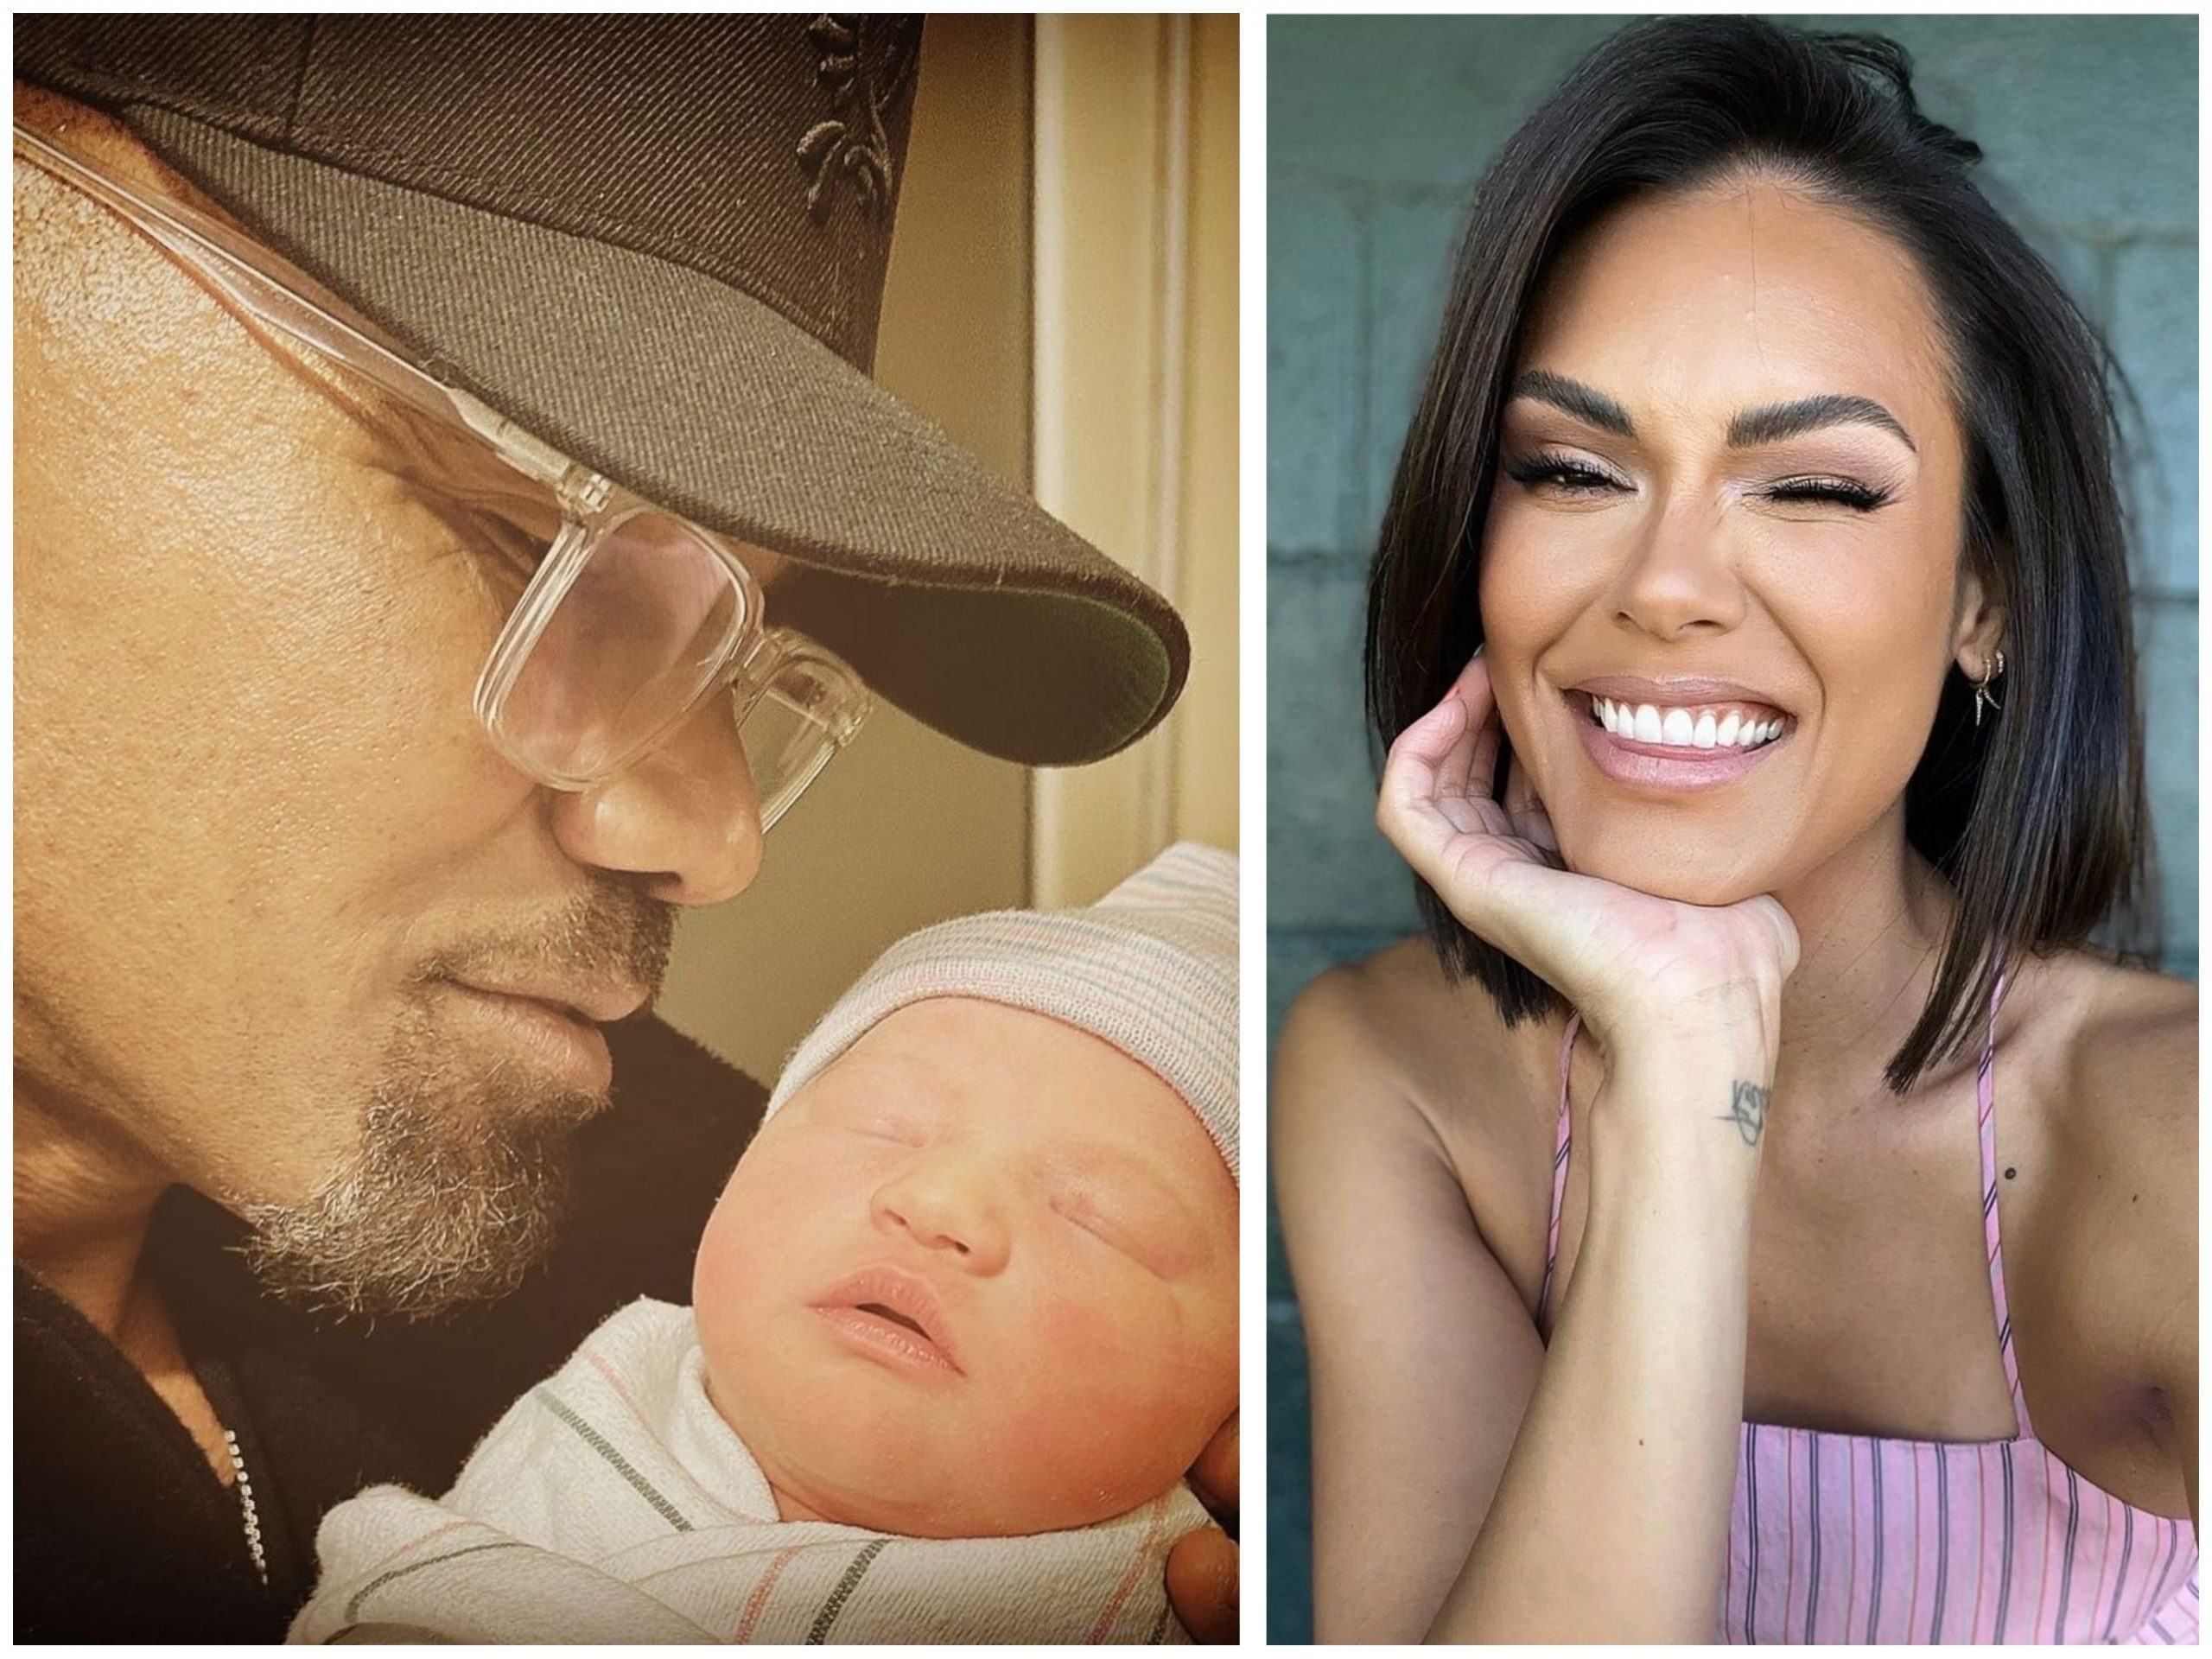 She’s Here! Shemar Moore Welcomes His First Child With Girlfriend Jesiree Dizon